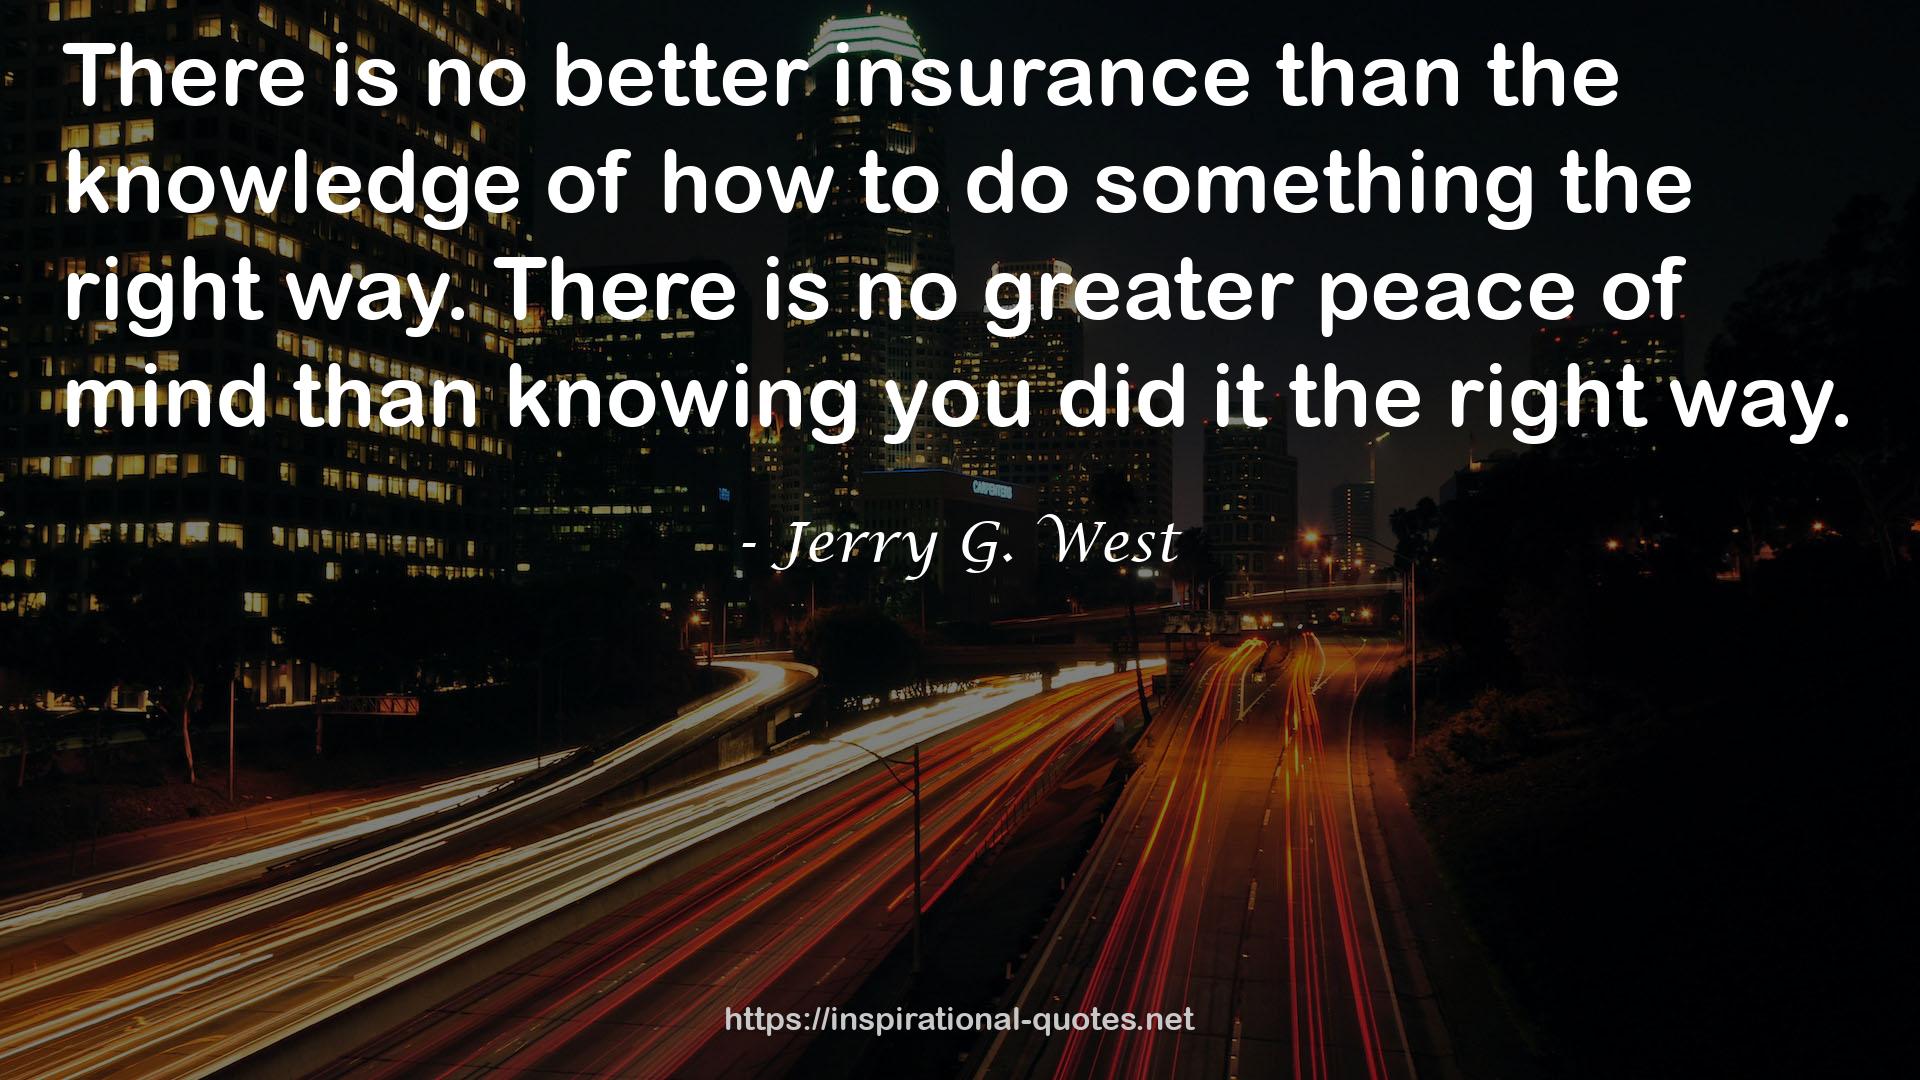 Jerry G. West QUOTES